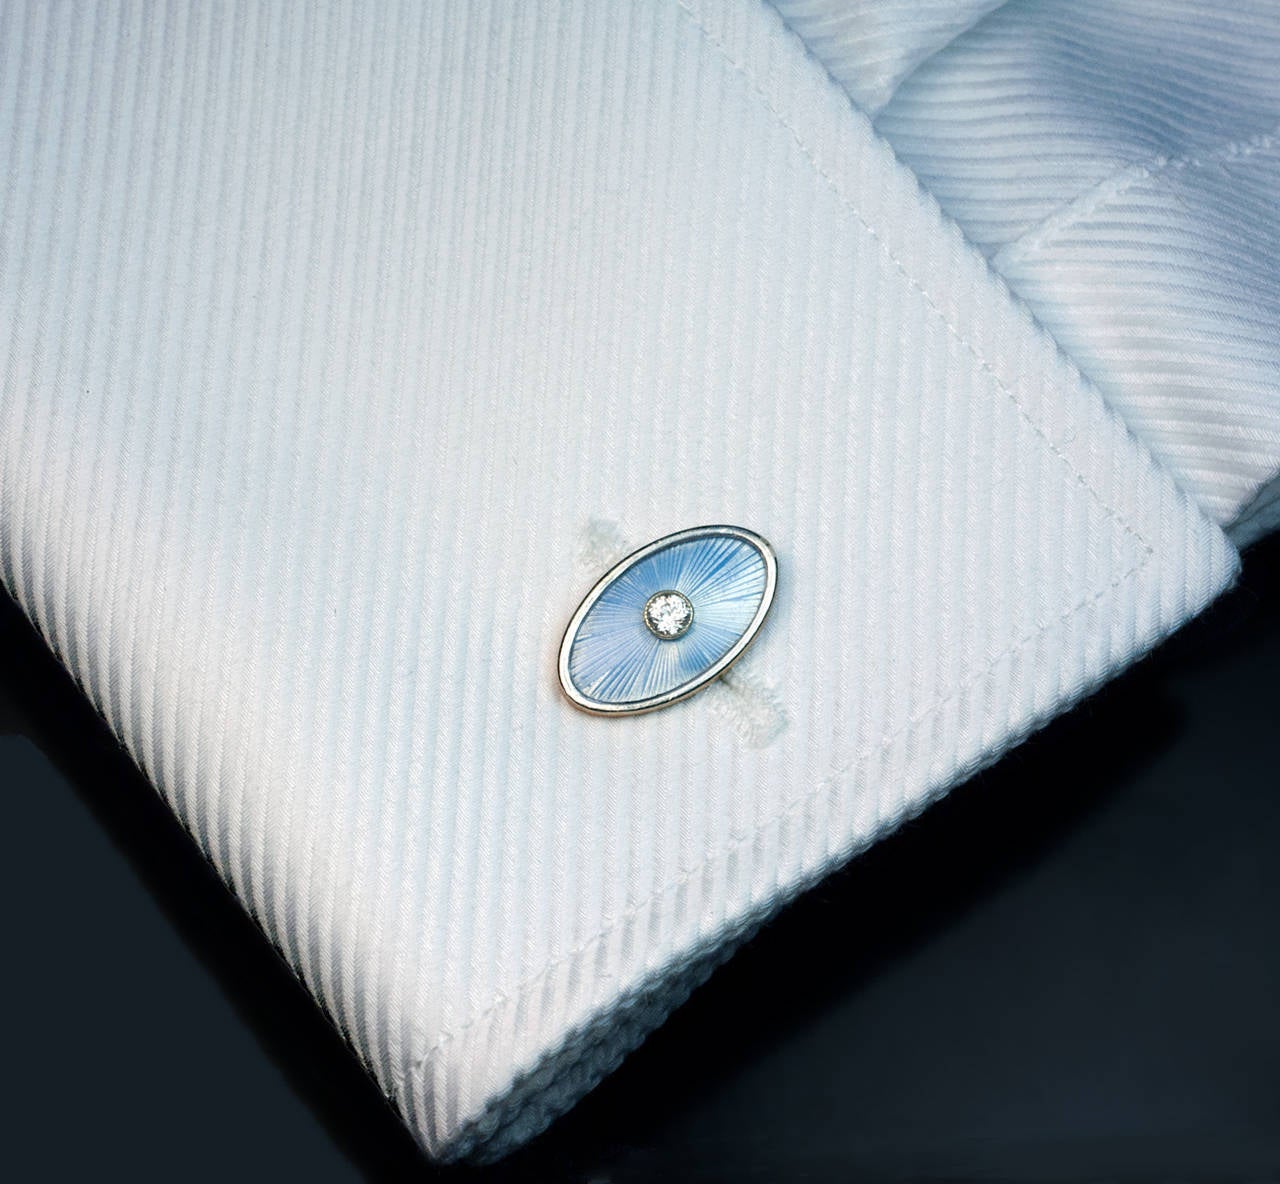 Made in St. Petersburg between 1908 and 1917

A pair of navette shaped gold cufflinks is covered with pale blue translucent enamel over a sunray guilloche pattern within platinum borders. 

Each cufflink is centered with a bezel-set old European